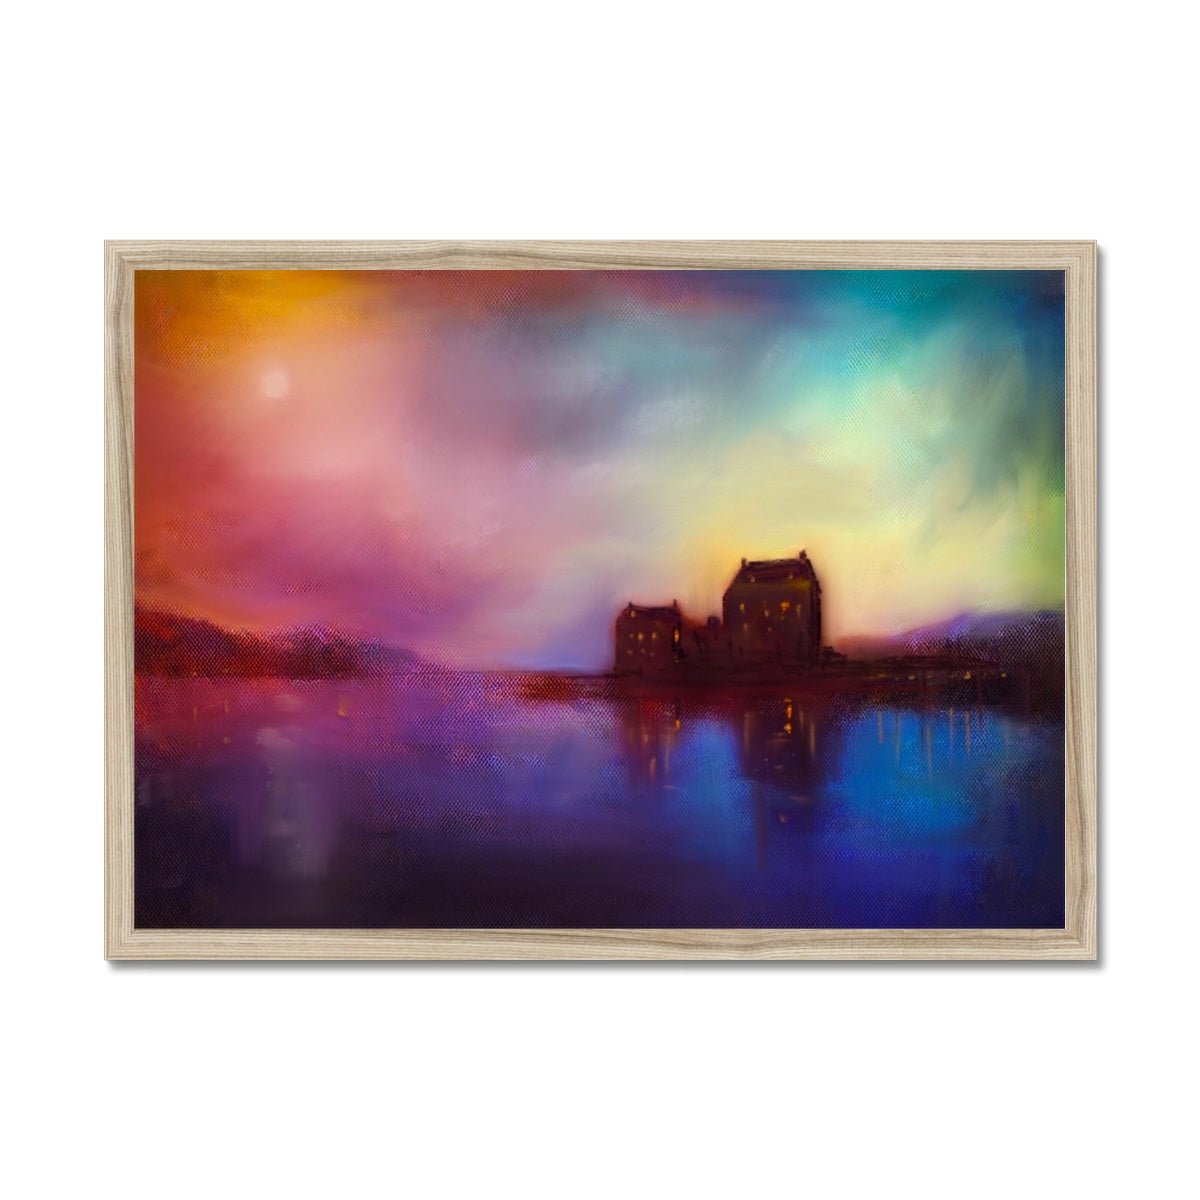 Eilean Donan Castle Sunset Painting | Framed Prints From Scotland-Framed Prints-Scottish Castles Art Gallery-A2 Landscape-Natural Frame-Paintings, Prints, Homeware, Art Gifts From Scotland By Scottish Artist Kevin Hunter